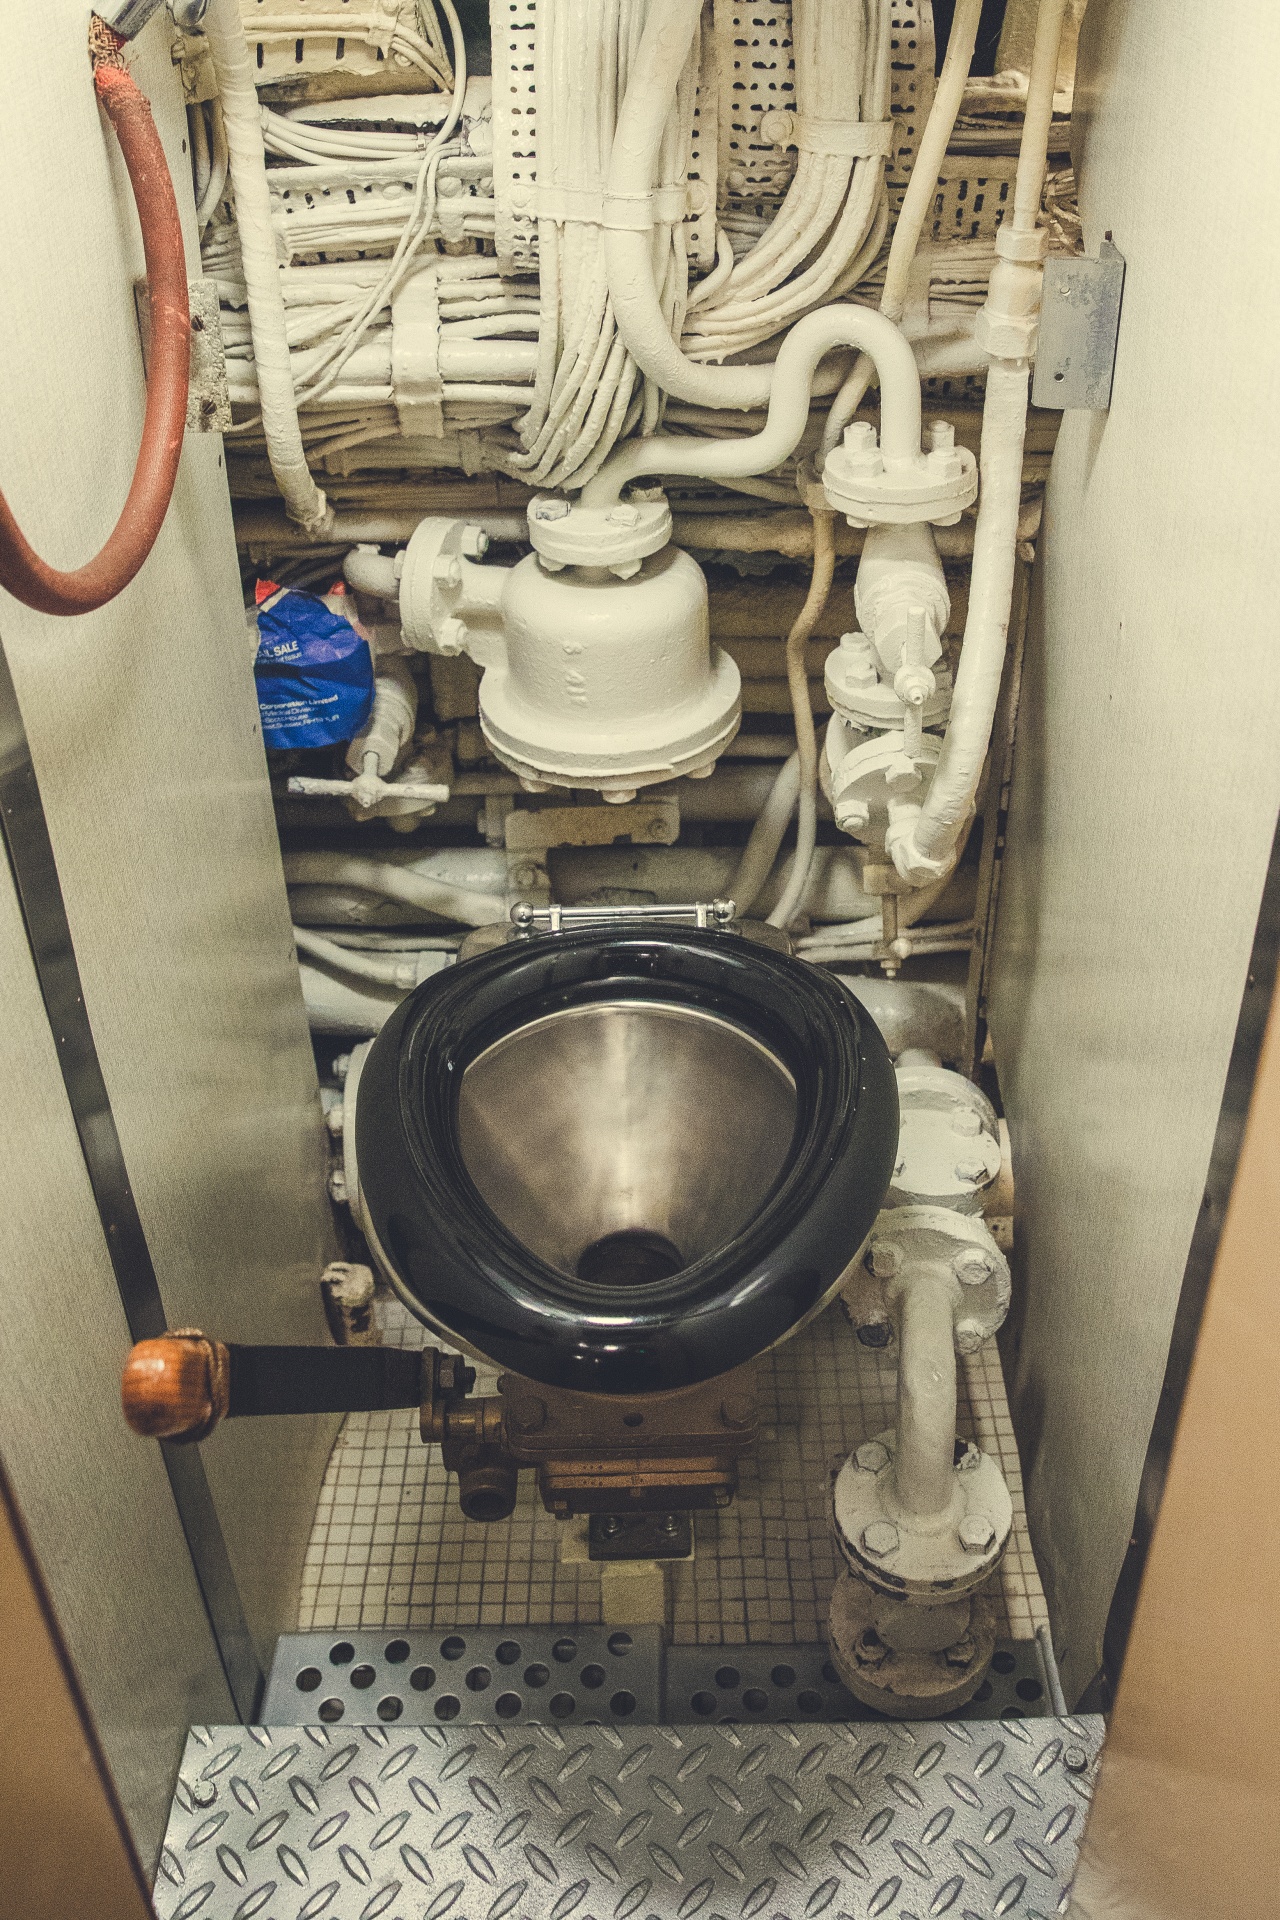 WC in a WWII submarine